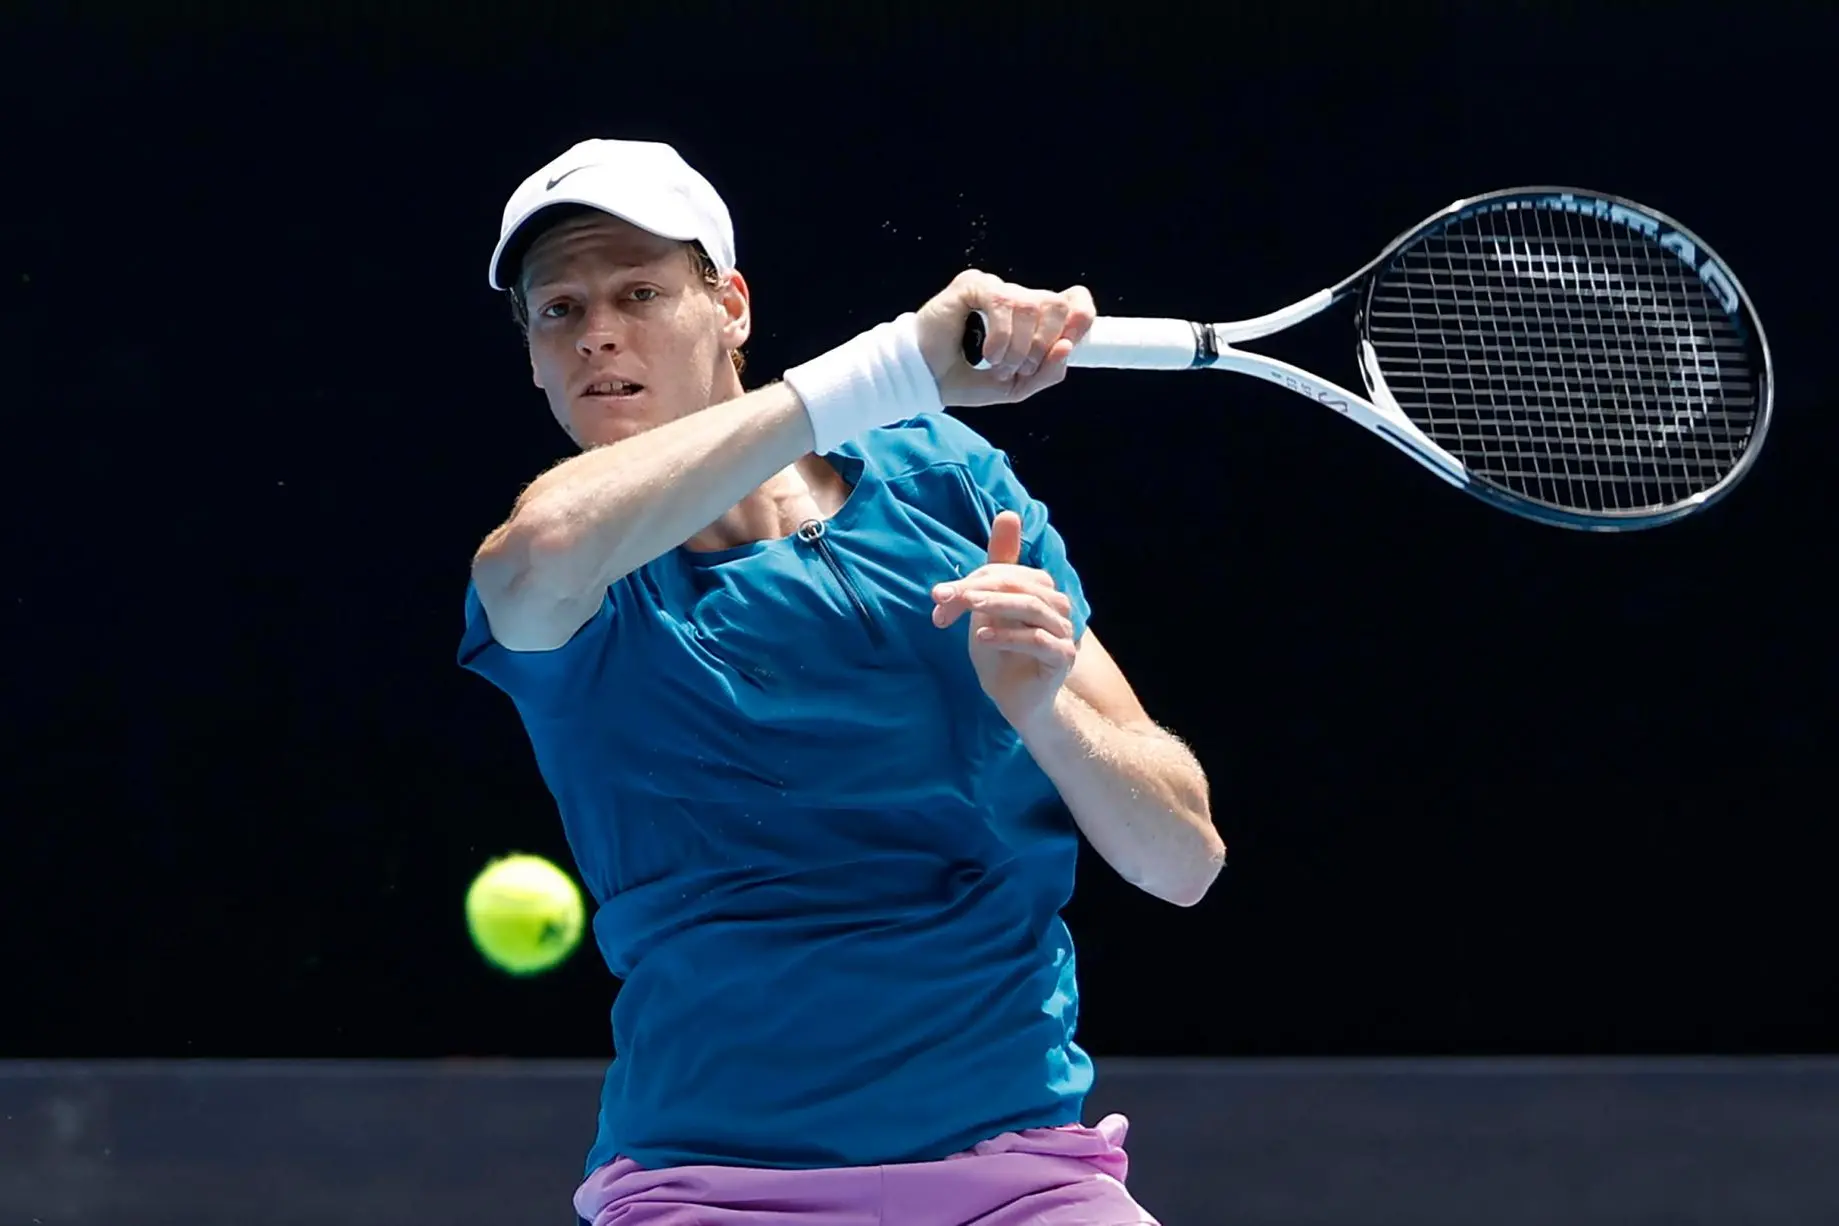 epa10407993 Jannik Sinner of Italy in action against Kyle Edmund of Great Britain during a Men’s Singles 1st round match on Day 1 of the 2023 Australian Open tennis tournament at Melbourne Park in Melbourne, Australia, 16 January 2023. EPA/DIEGO FEDELE AUSTRALIA AND NEW ZEALAND OUT